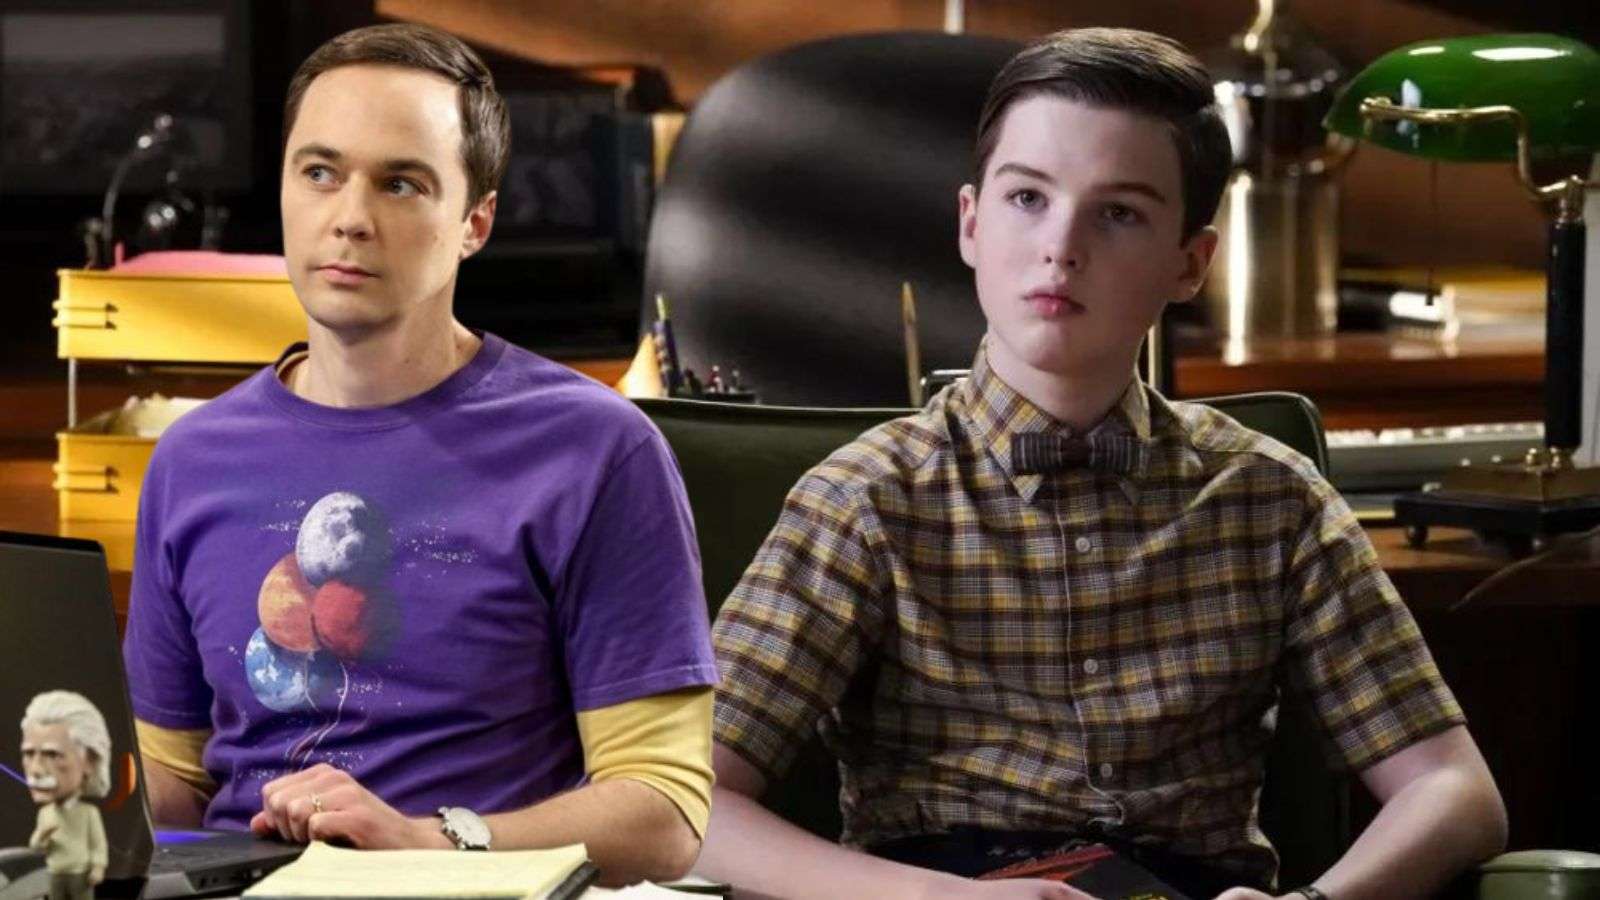 Jim Parsons and Iain Armitage as Sheldon Cooper